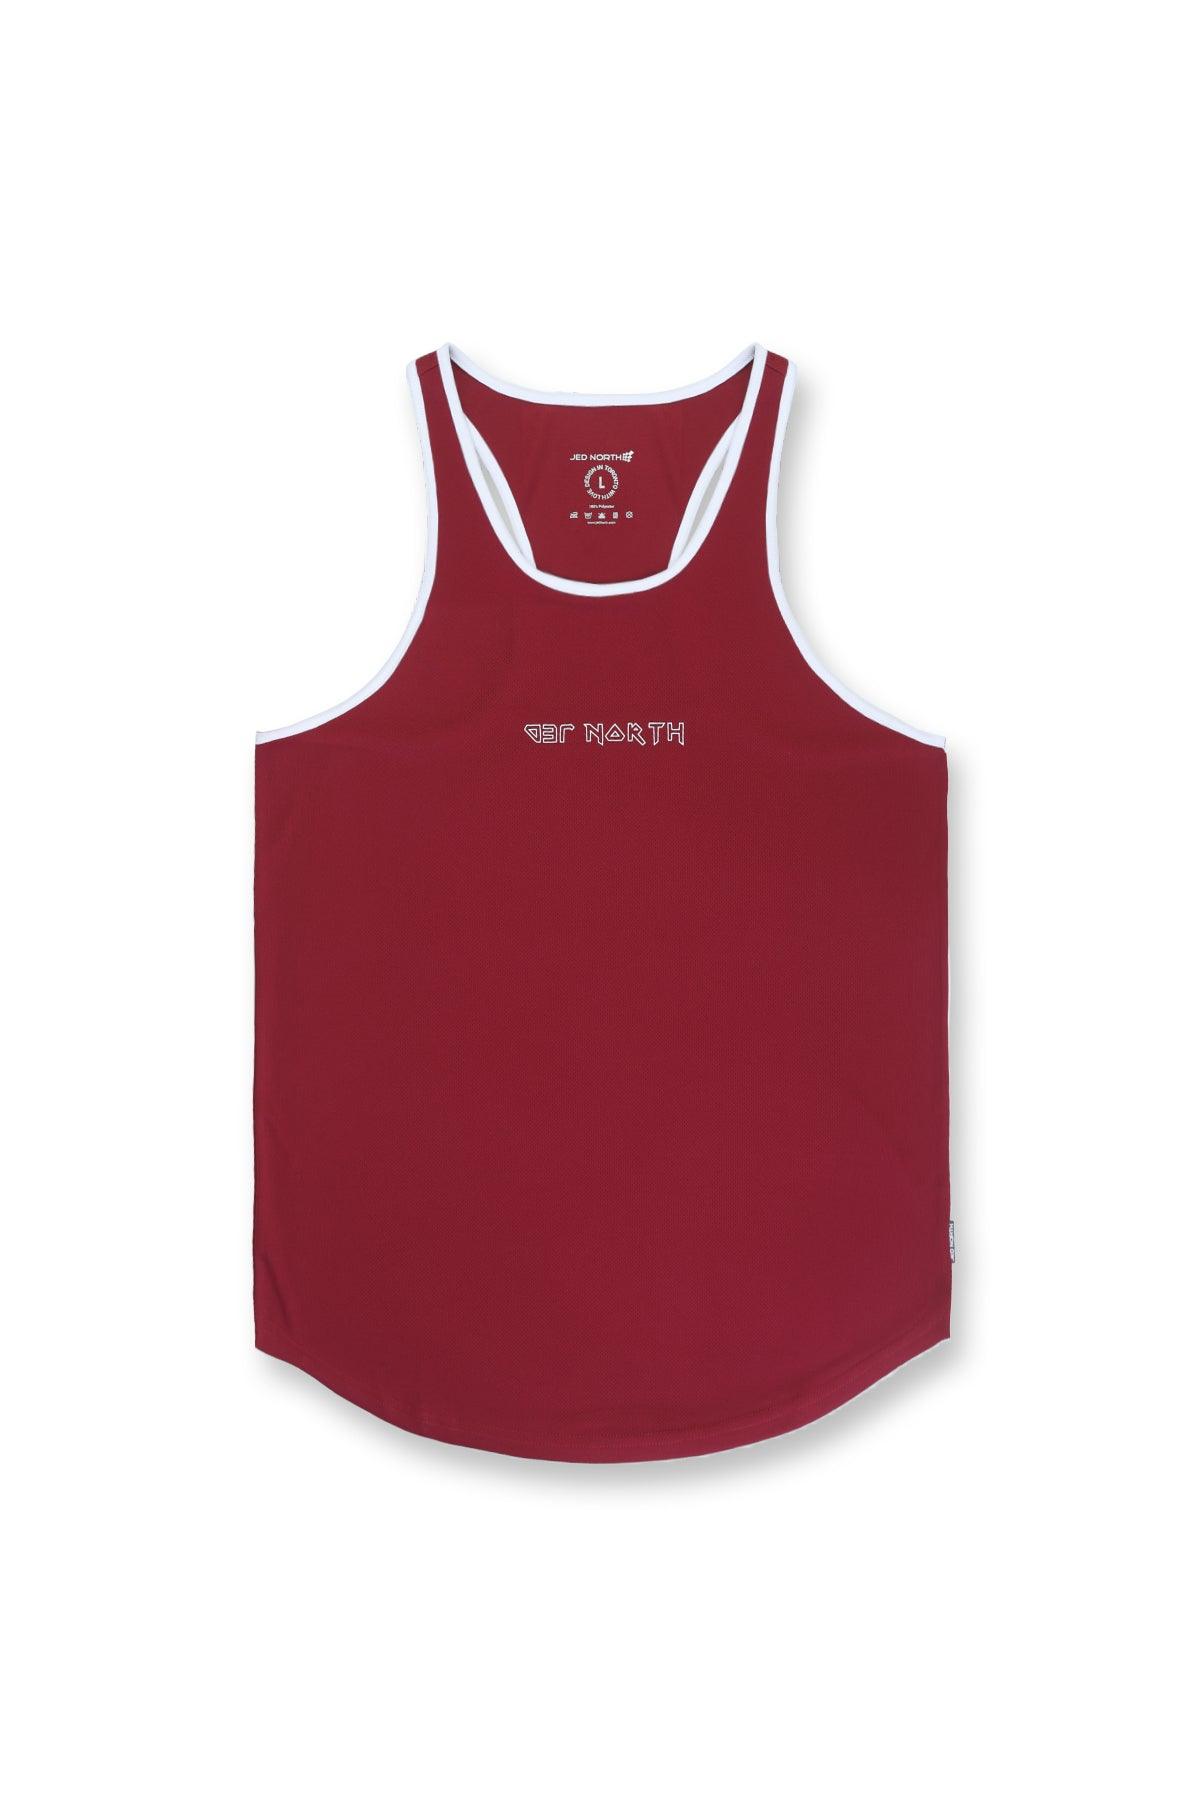 Fast-Dry Workout Stringer - Maroon & White - Jed North